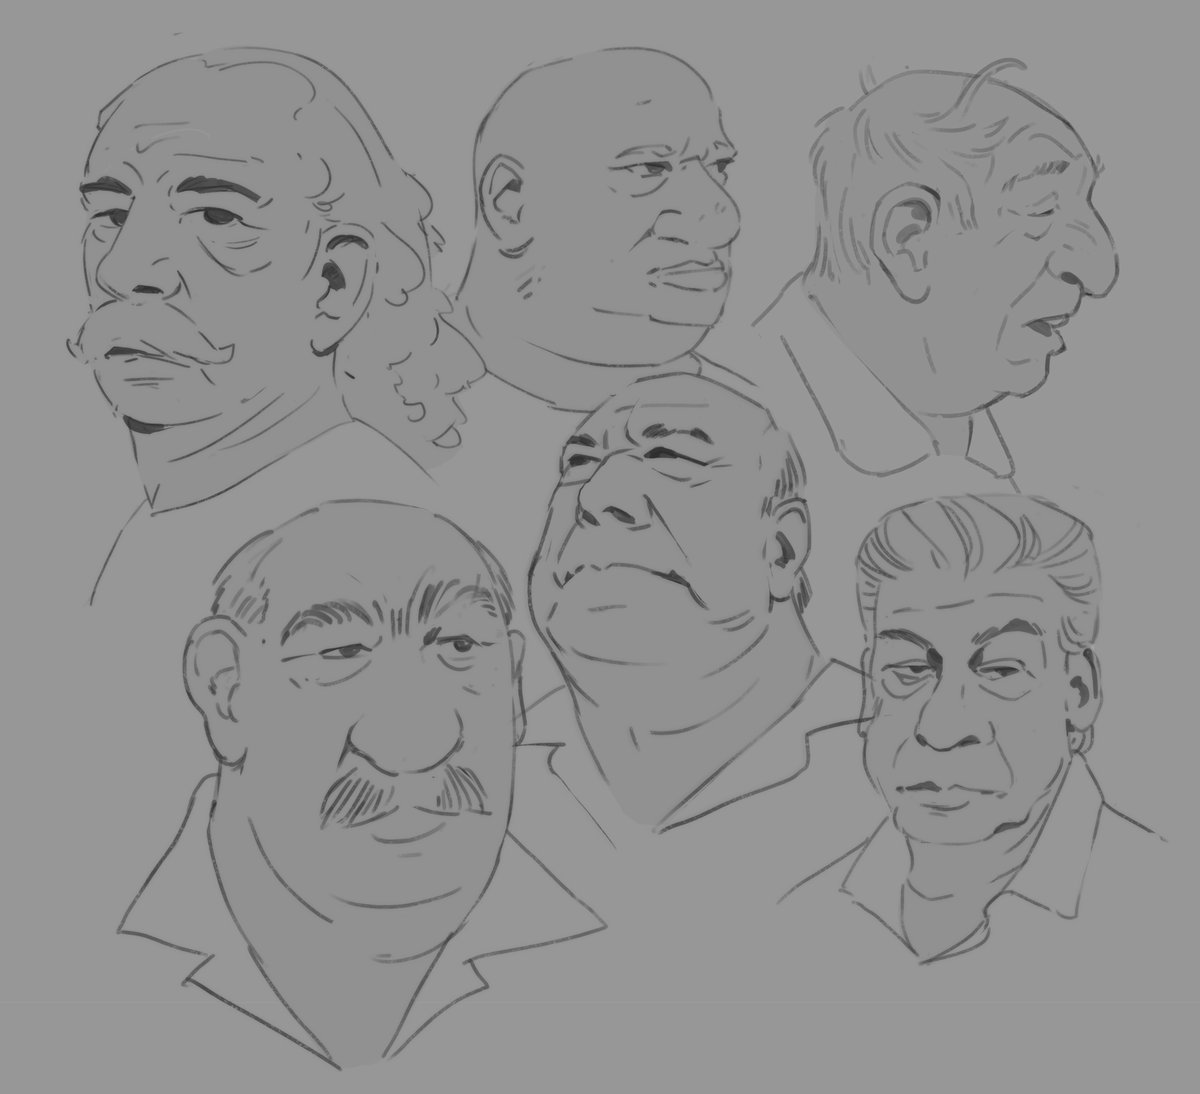 been watching Urasawa draw lately, got inspired by the big noses!